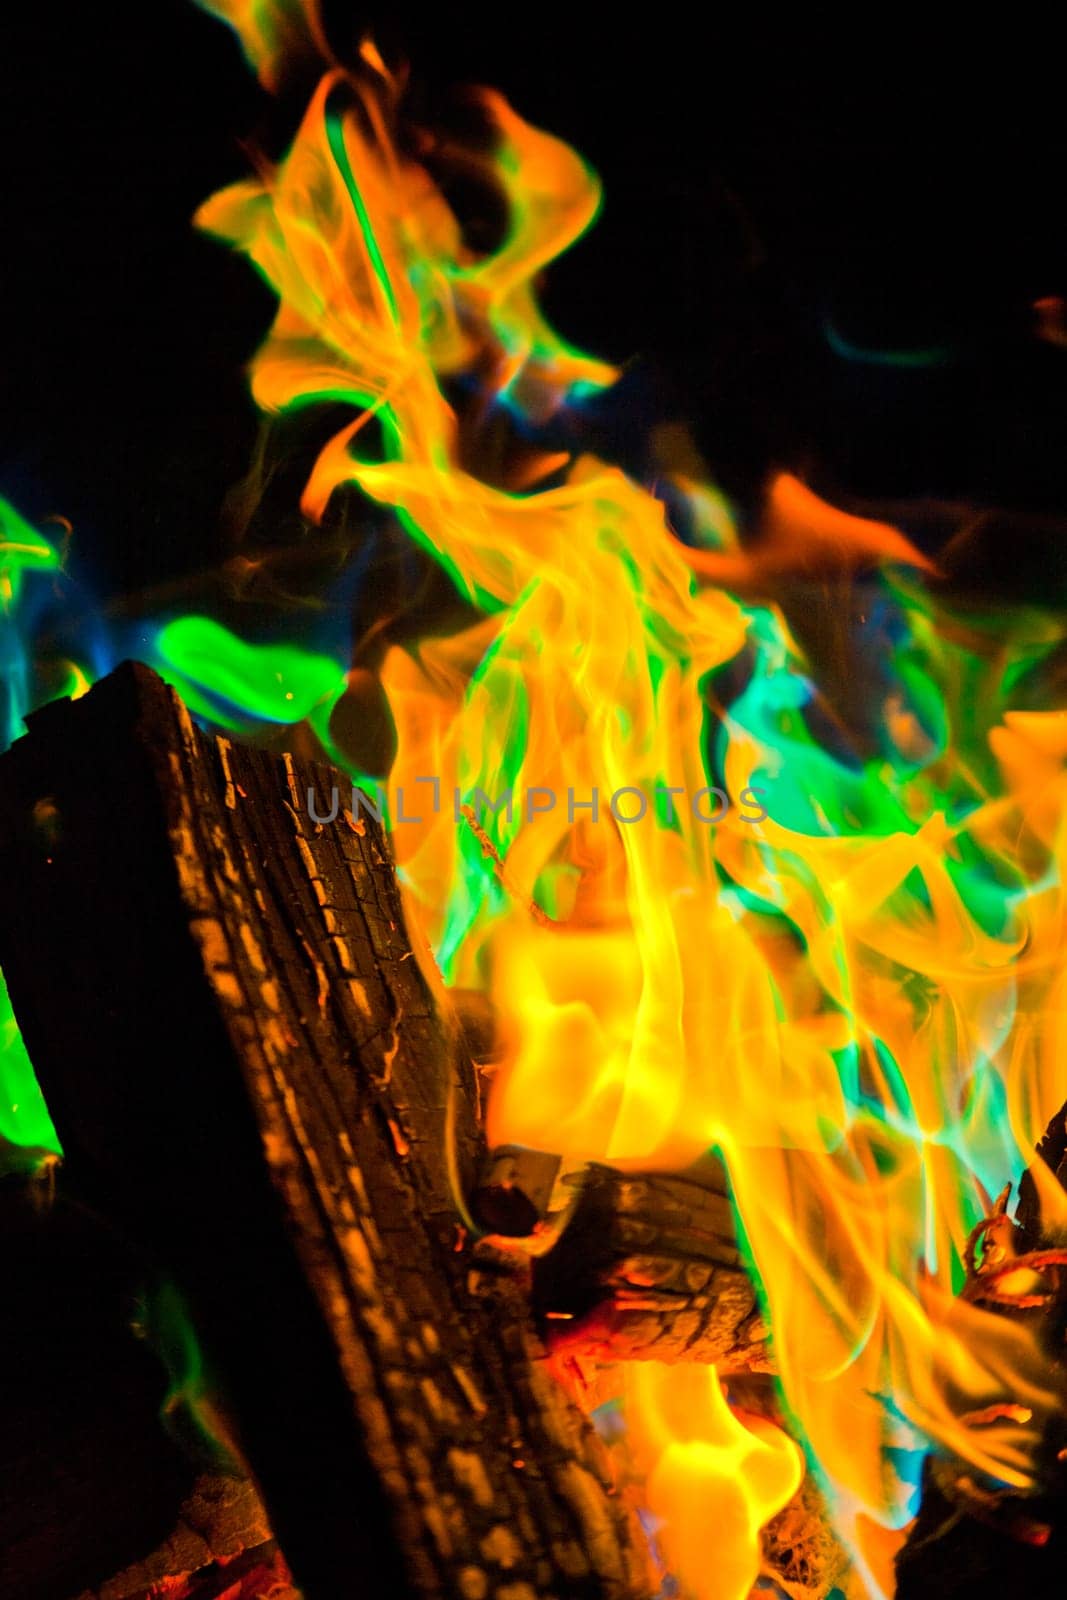 Mystical Dance of Campfire Flames in Vivid Orange and Green by njproductions